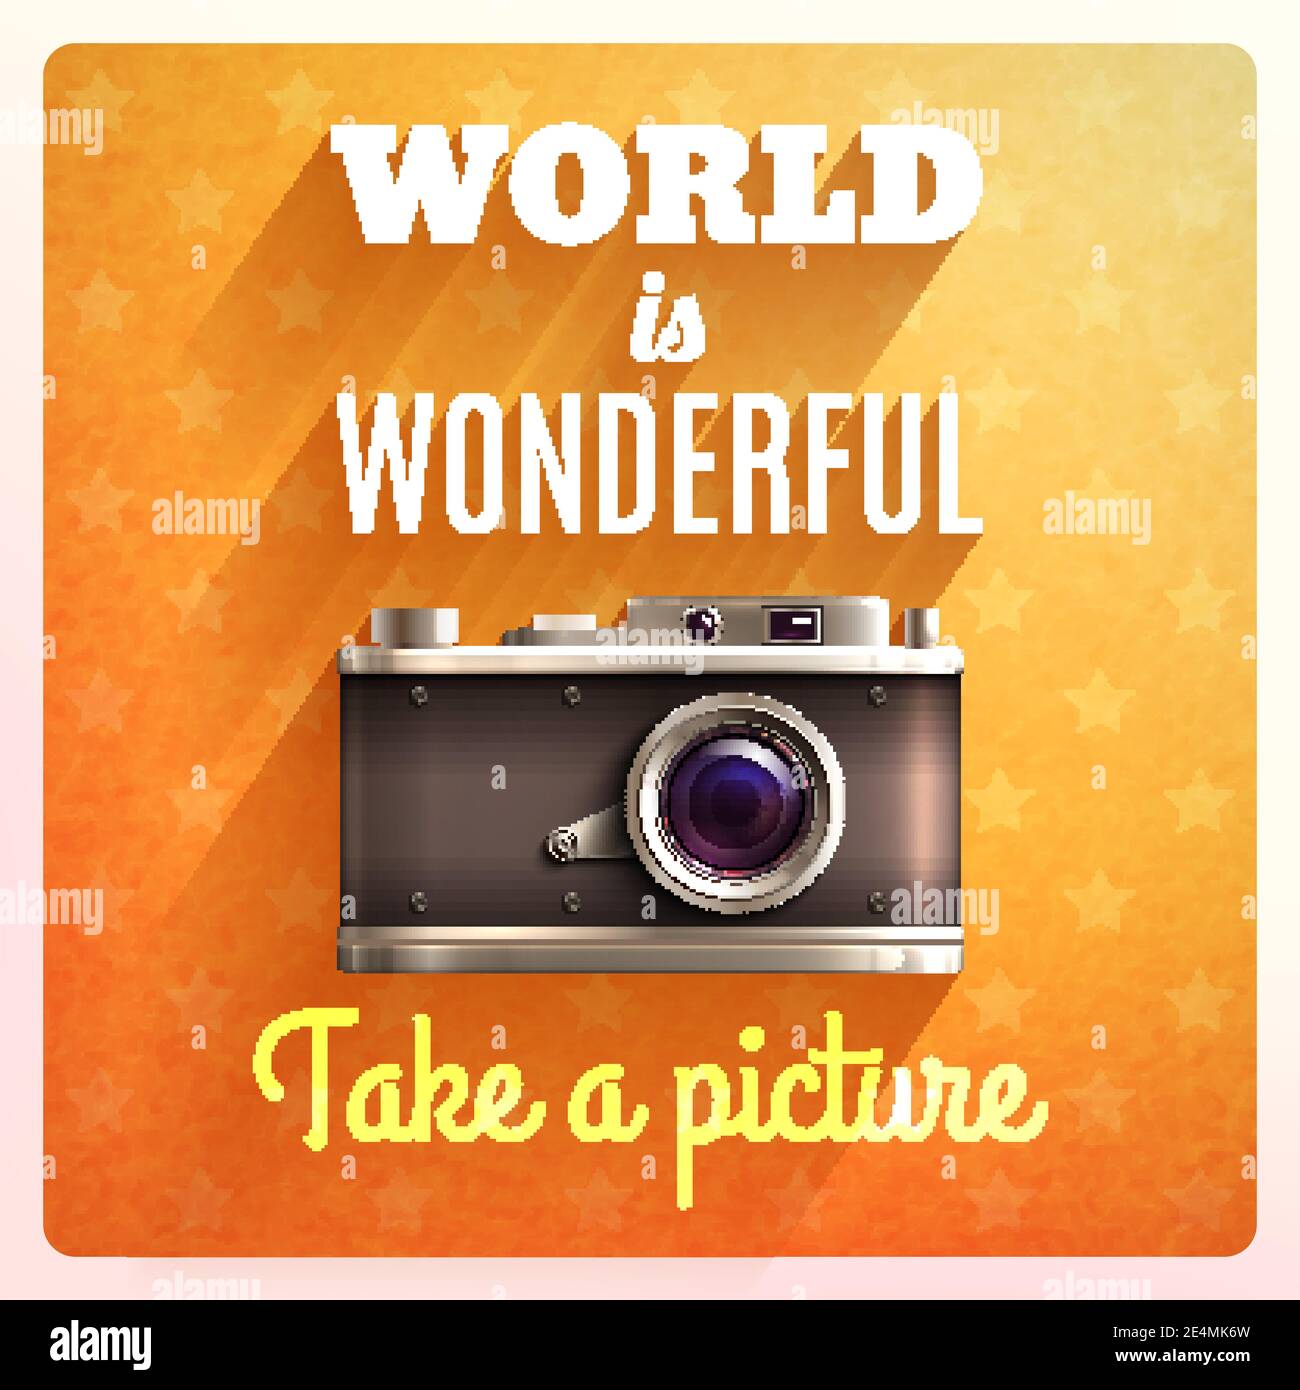 Retro photo camera poster with world is wonderful text vector illustration Stock Vector